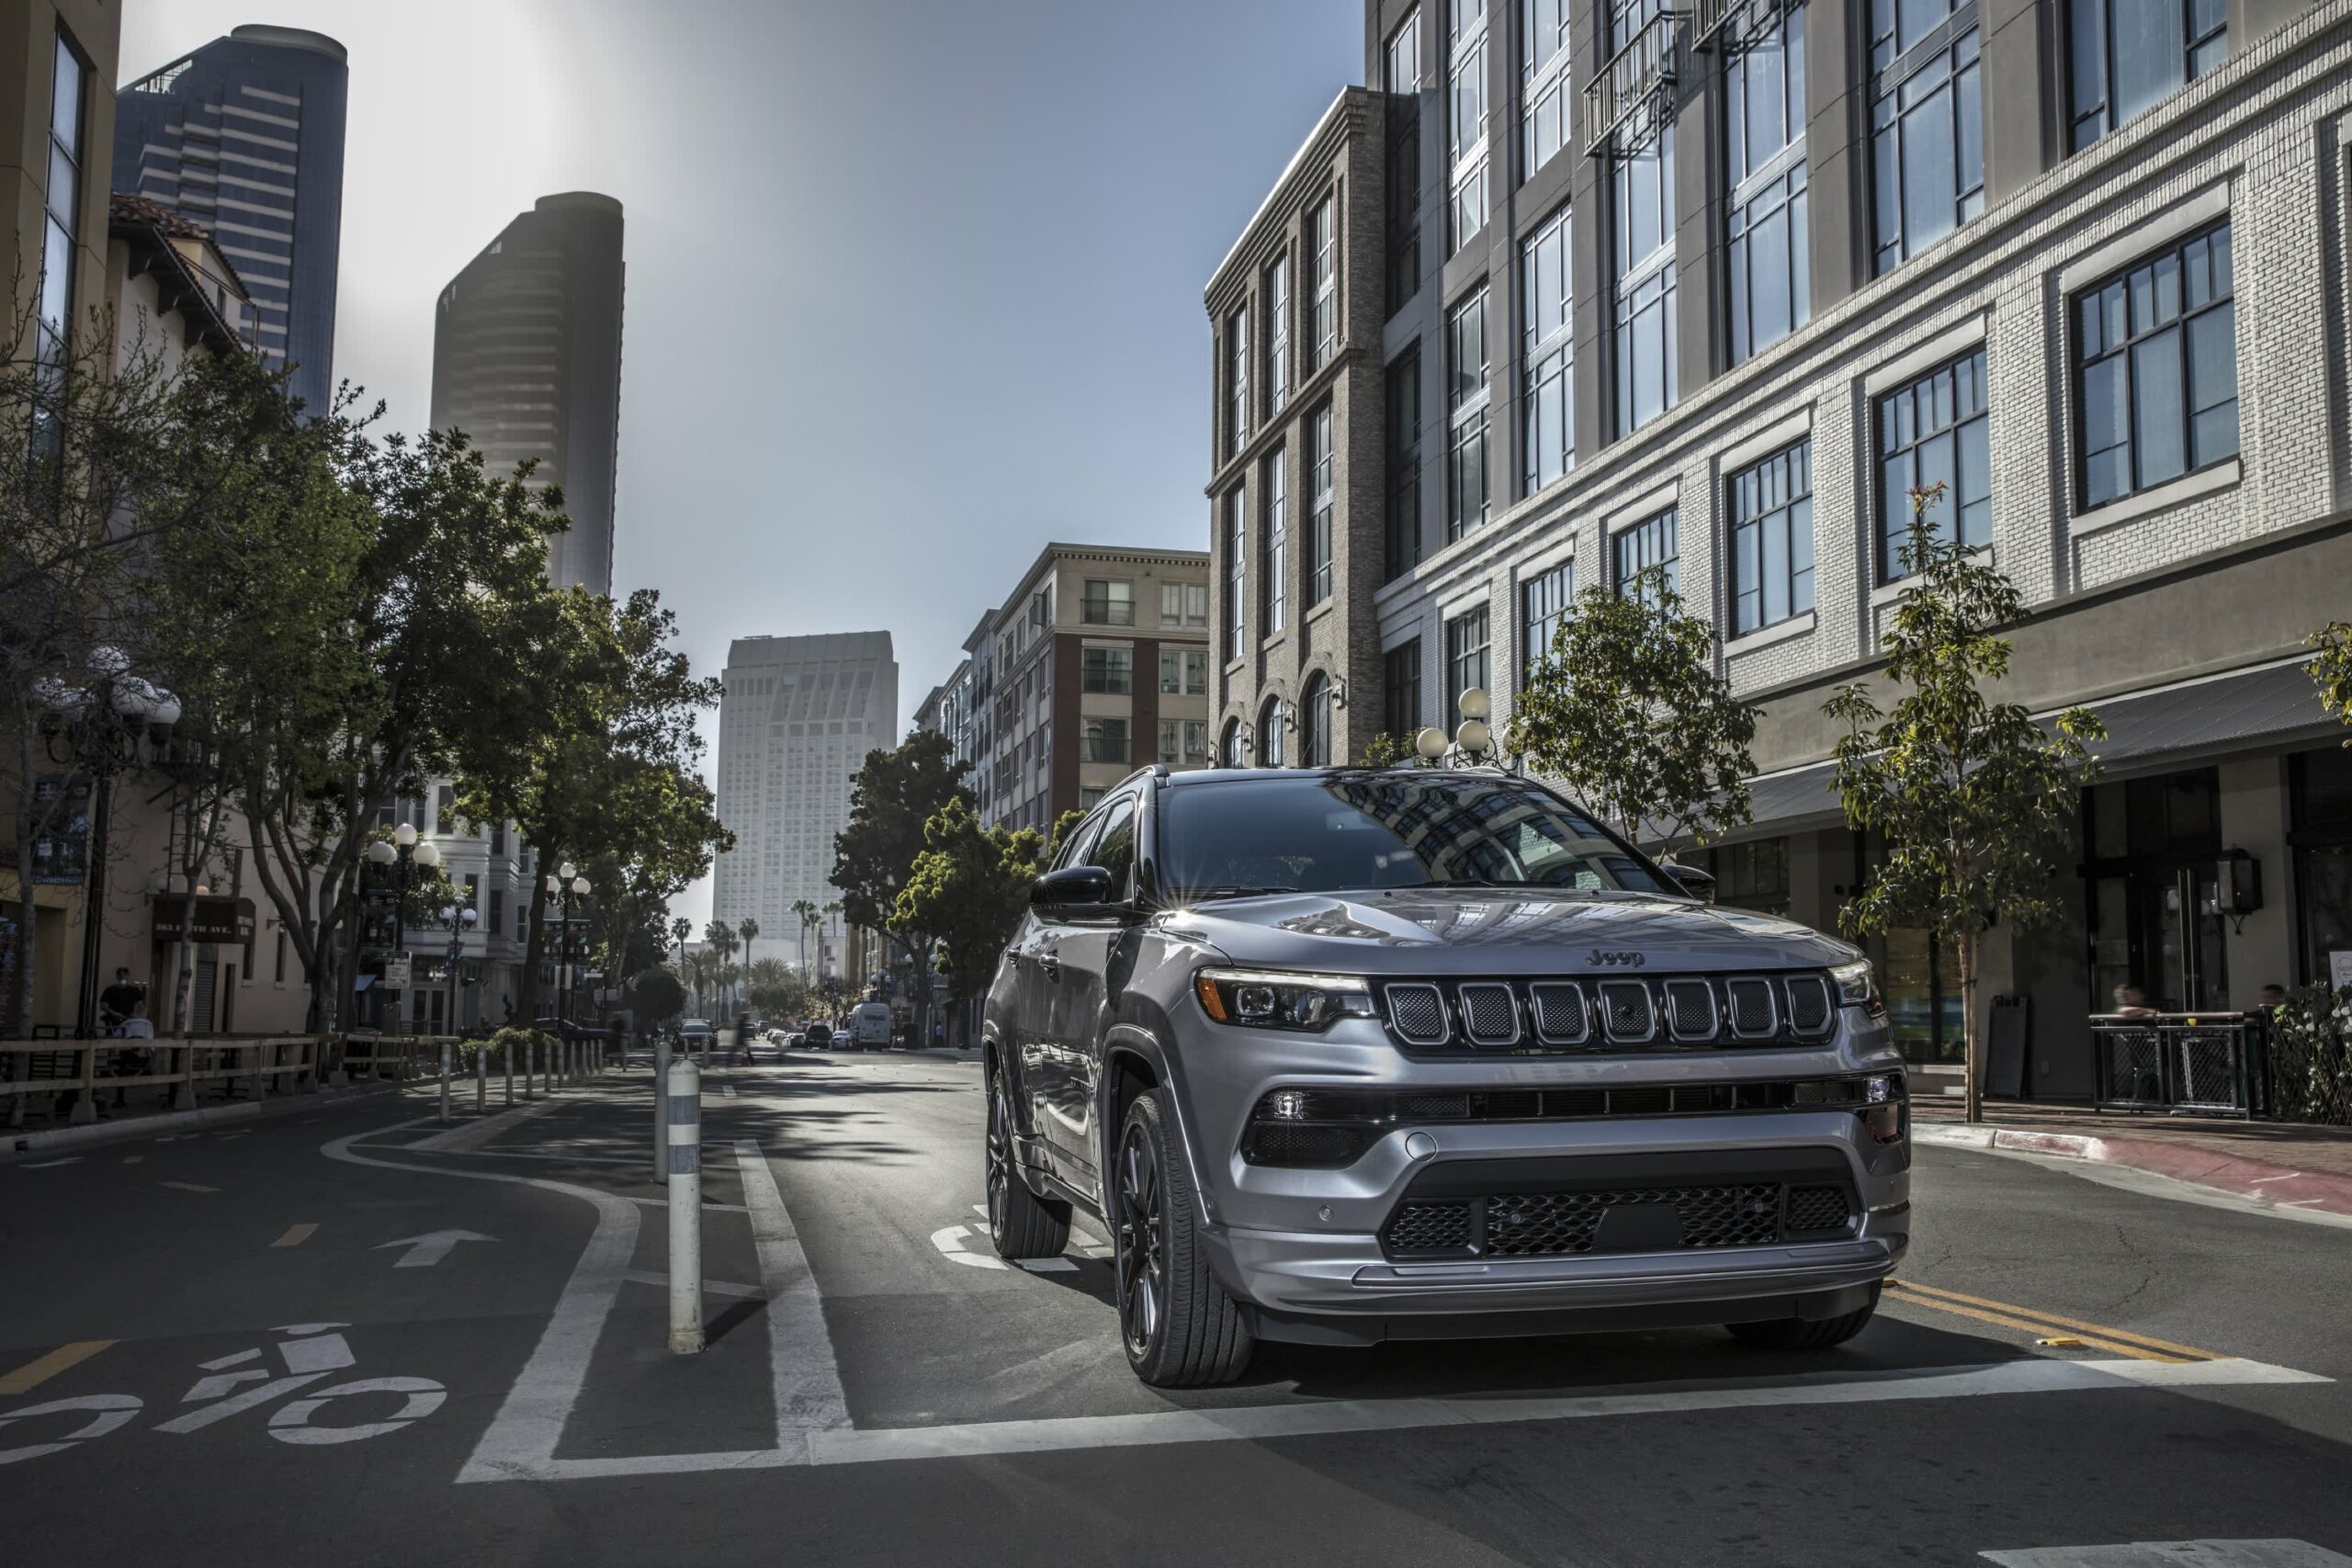 Jeep unveils new small Compass SUV forward of EV push